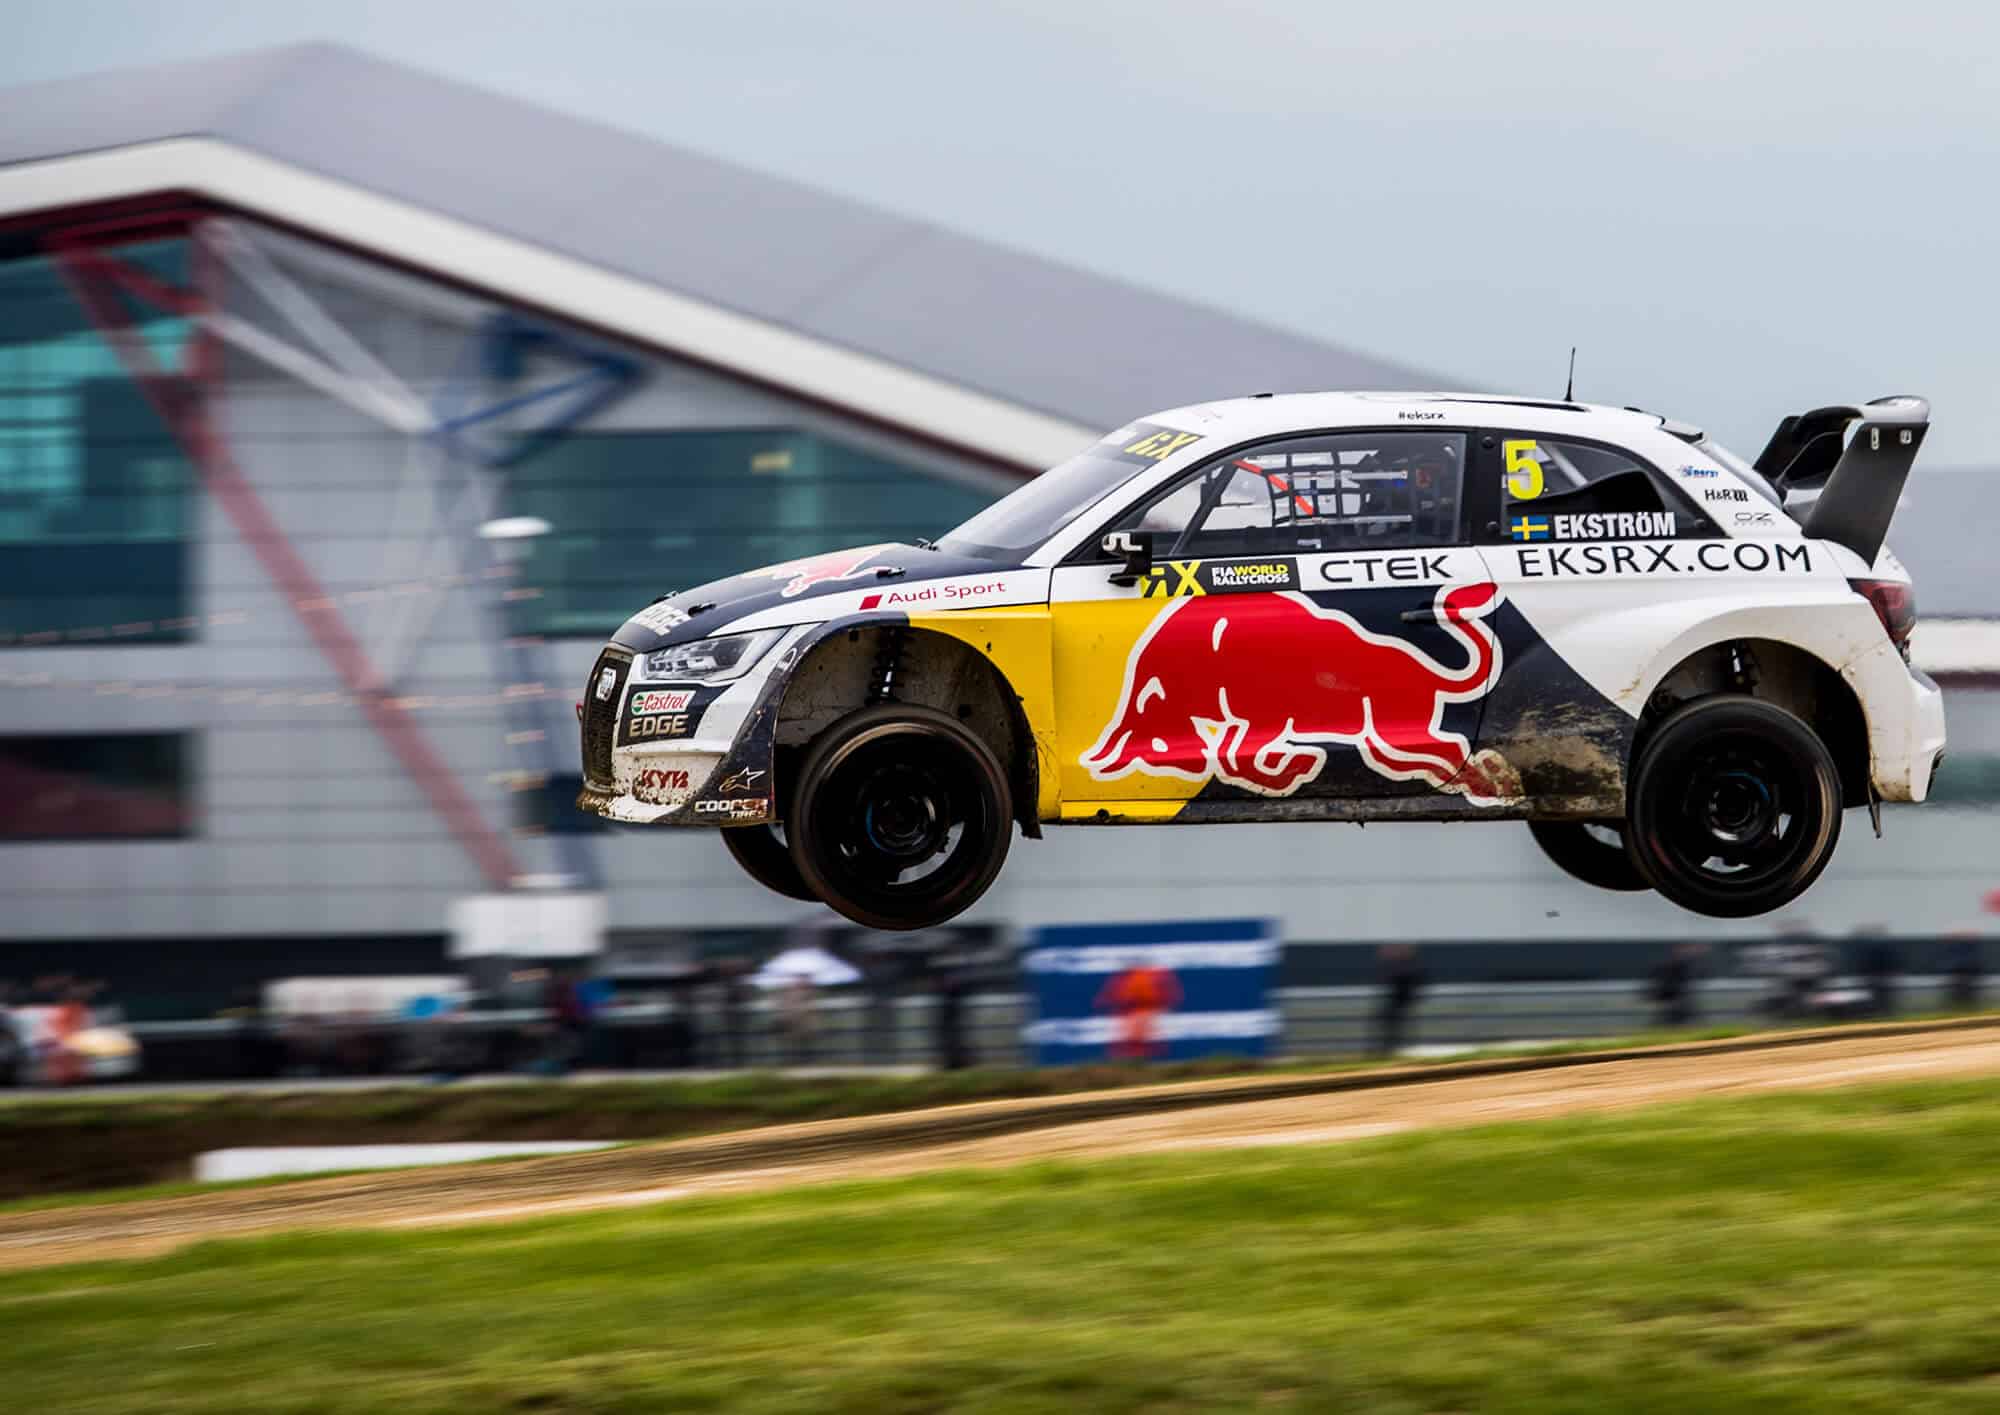 Click to find out more about our Silverstone World Rallycross project from Driven International. Contact us to discuss how we can help with your project.